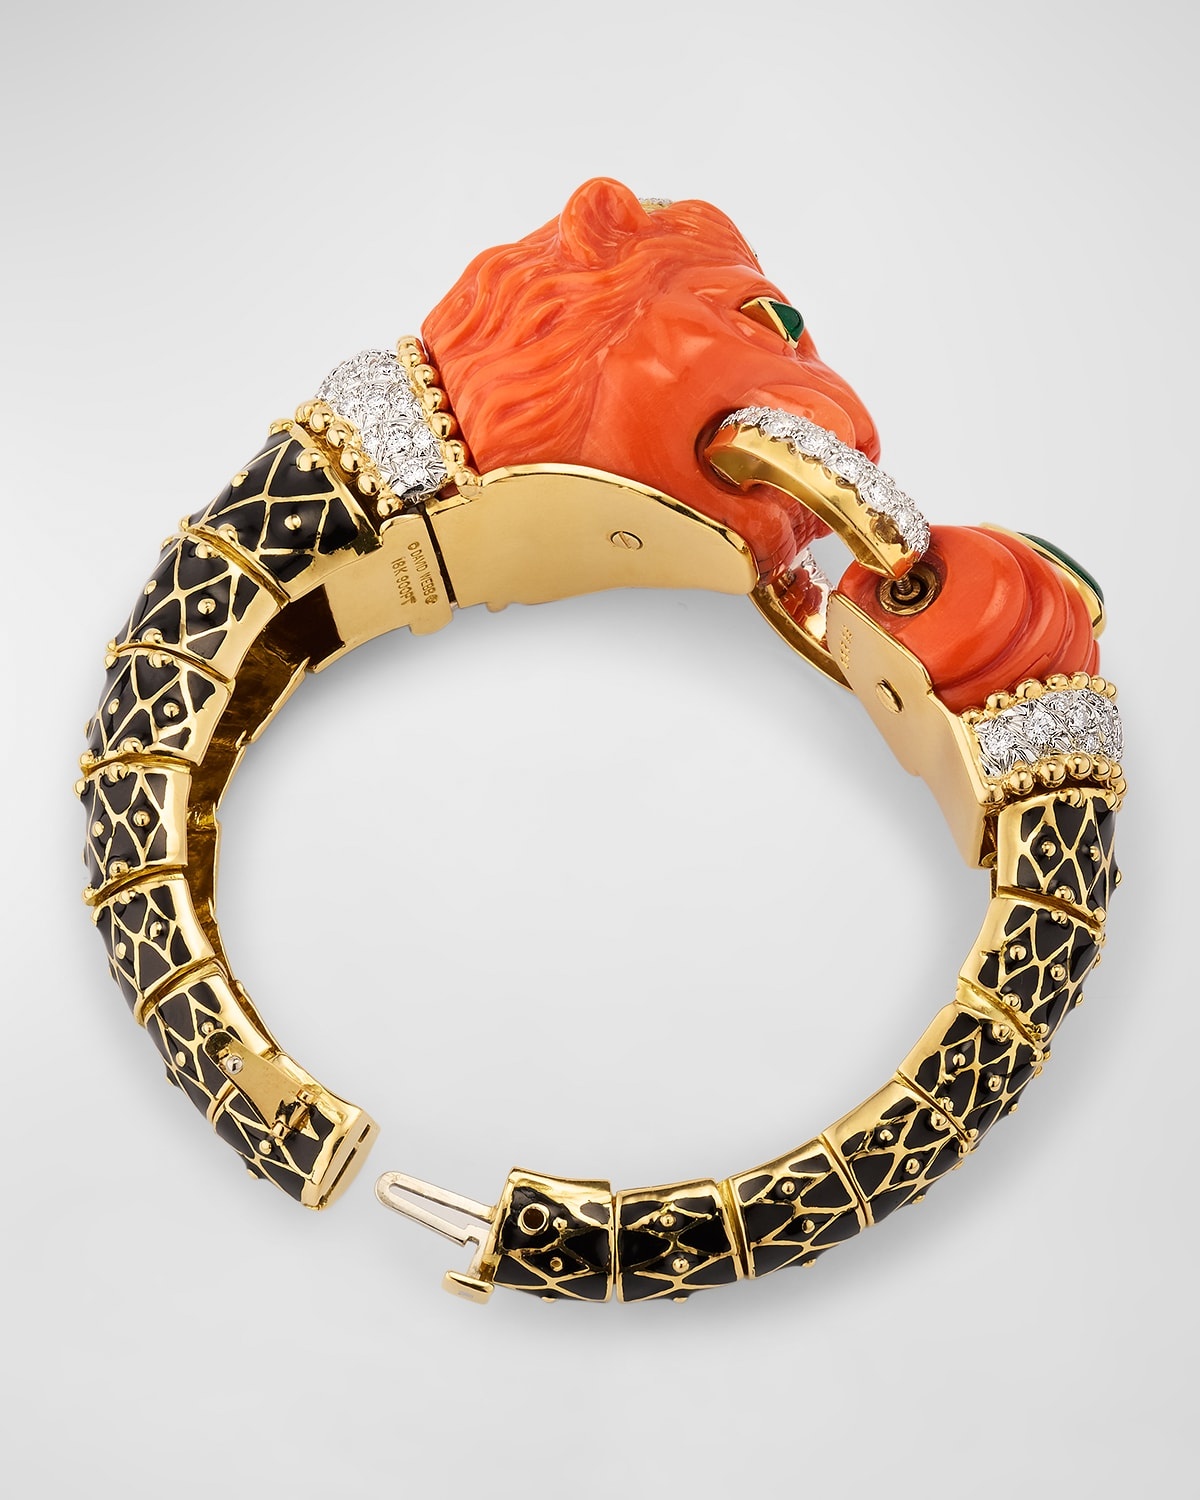 18K Yellow Gold and Platinum Lion Bracelet with Coral, Emerald and Diamonds - 4